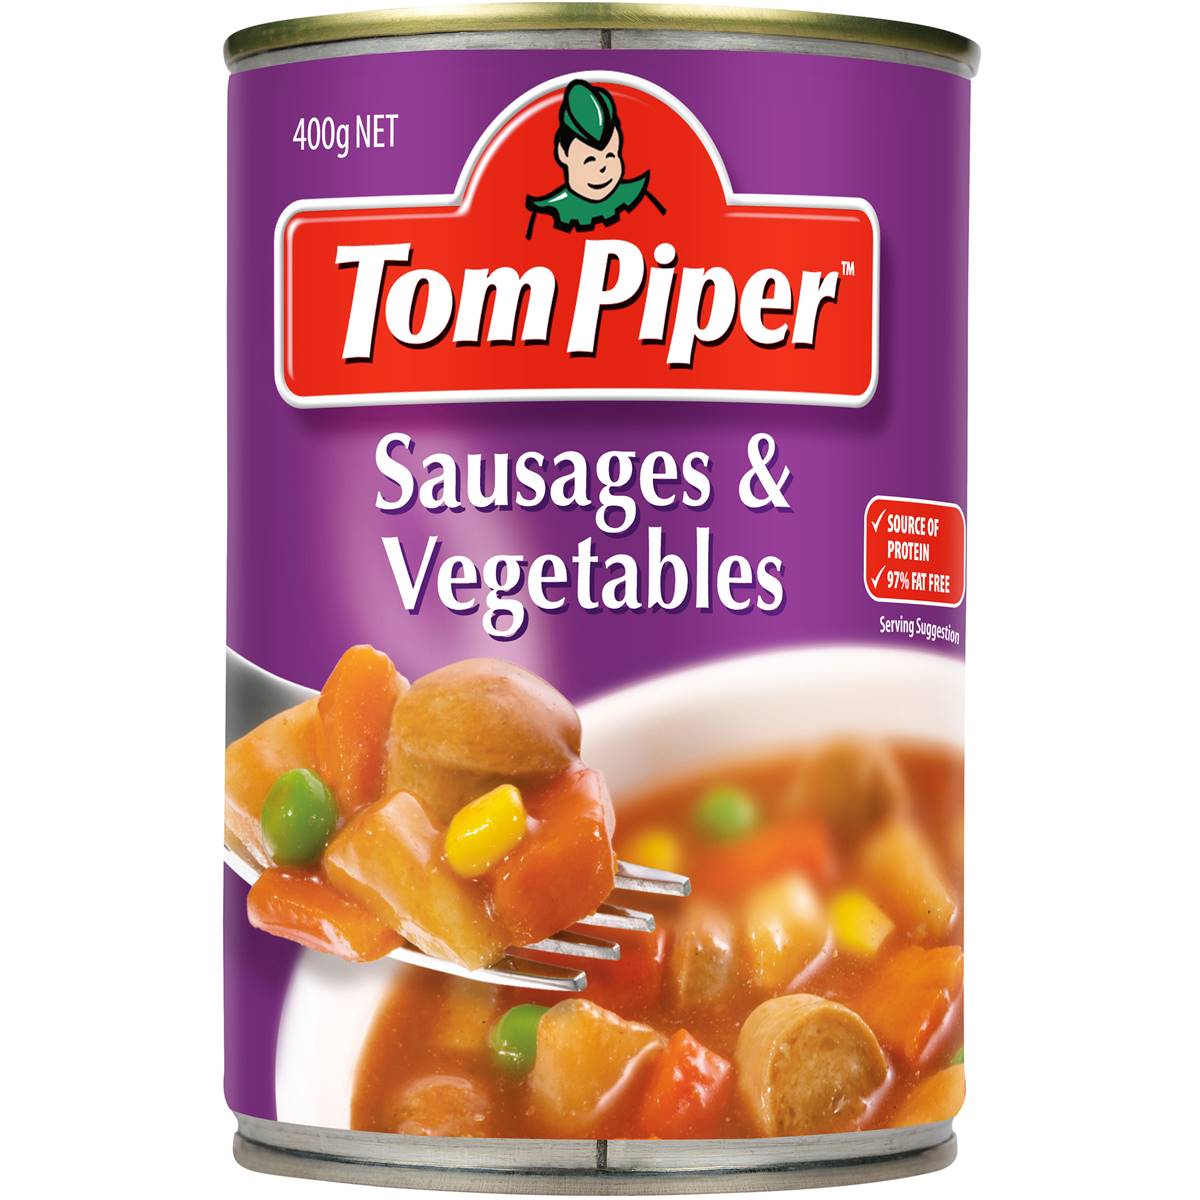 Calories in Tom Piper Sausages & Vegetables